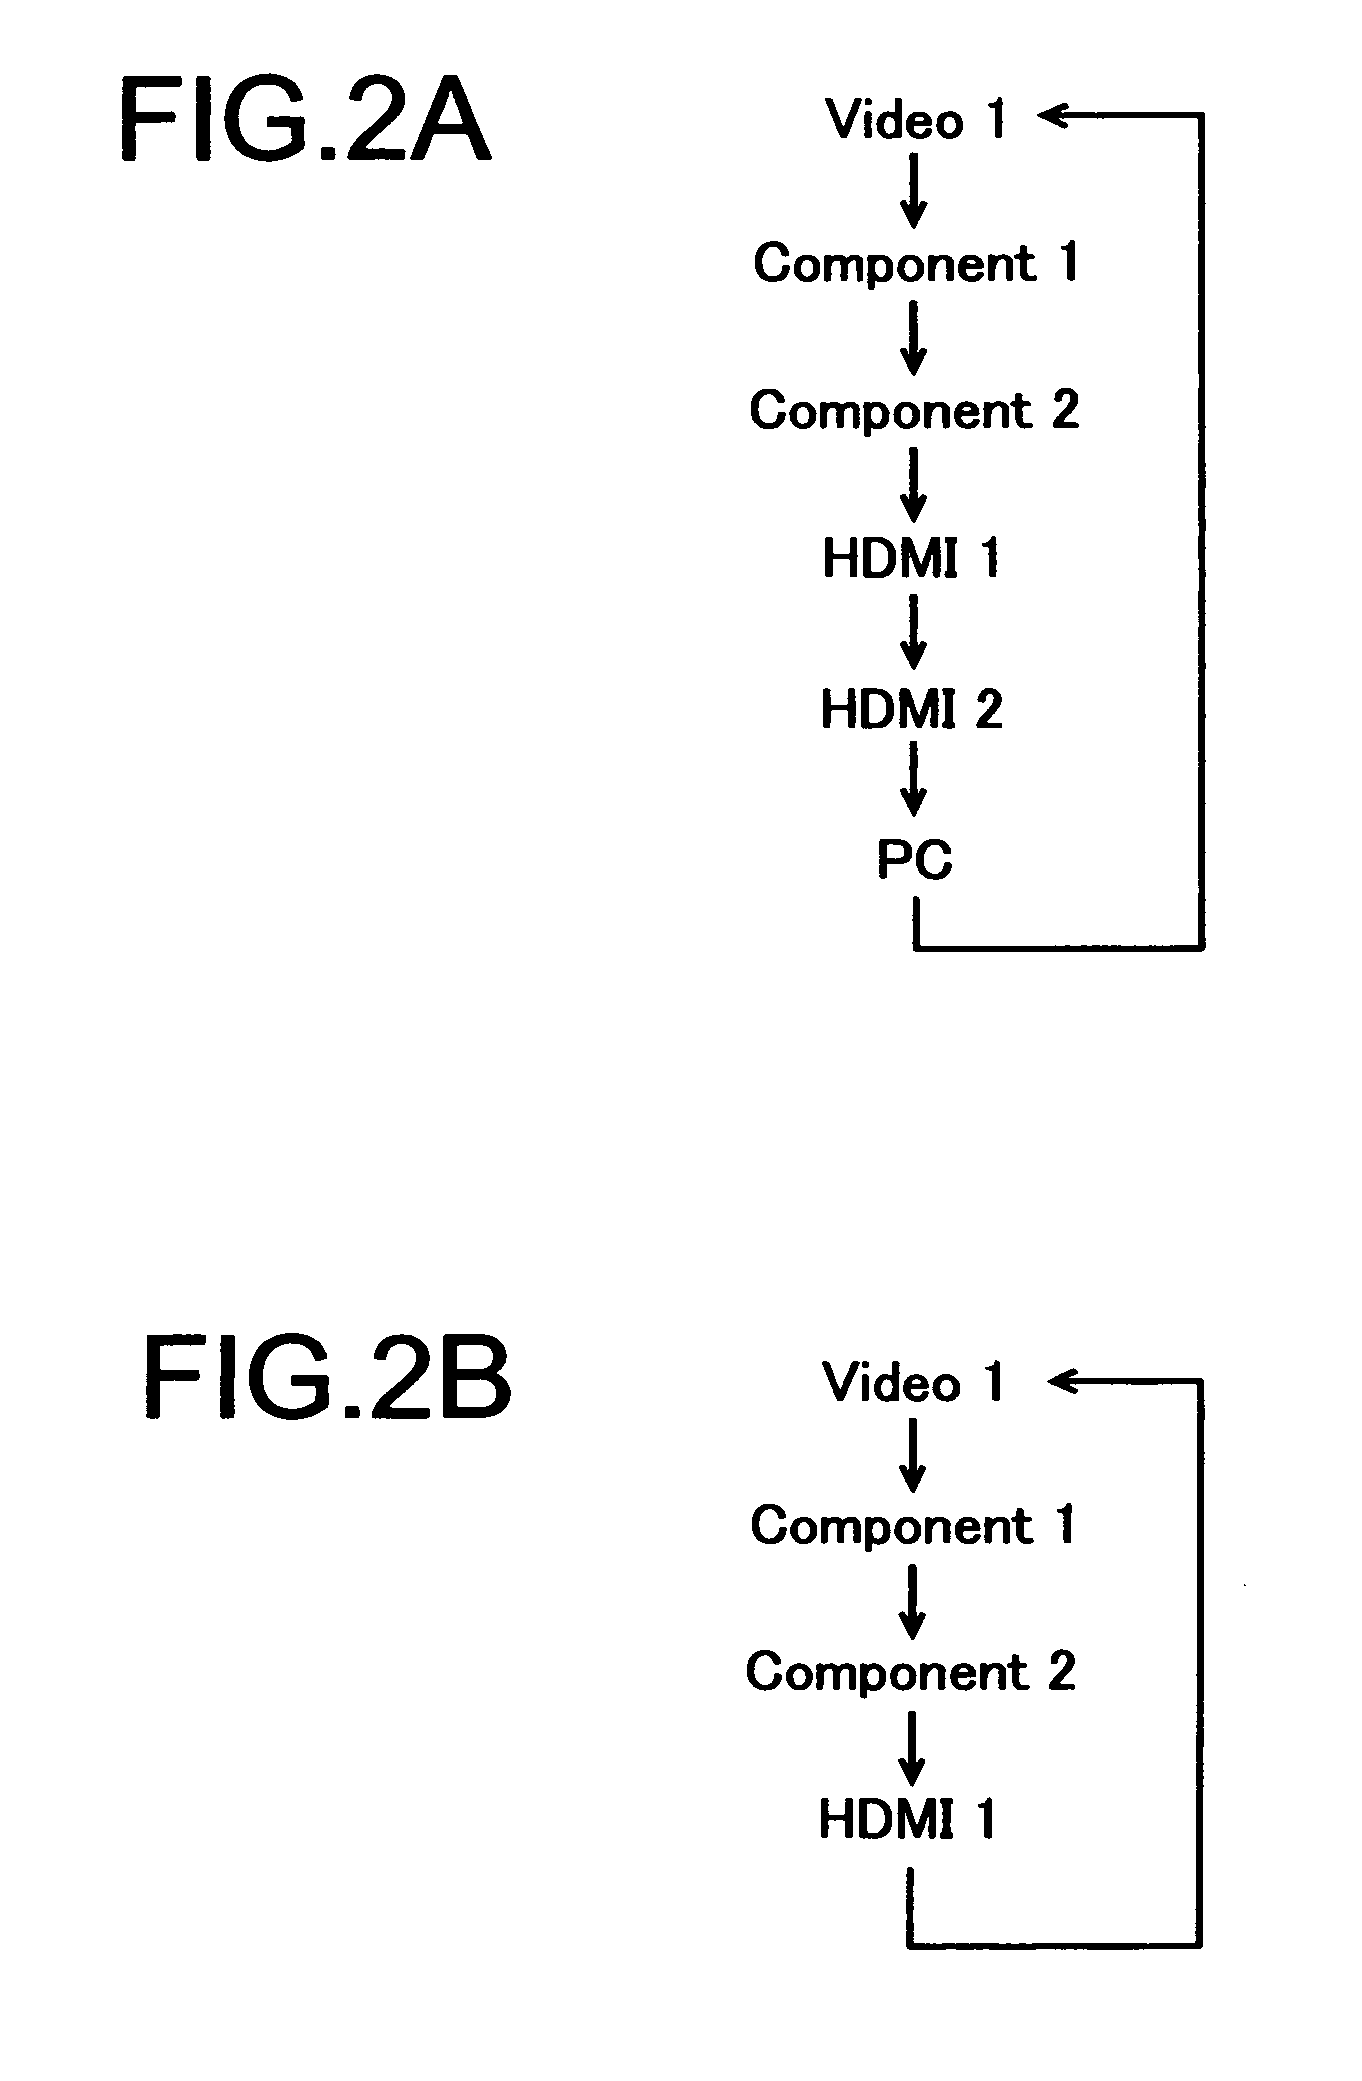 Inputs switching device